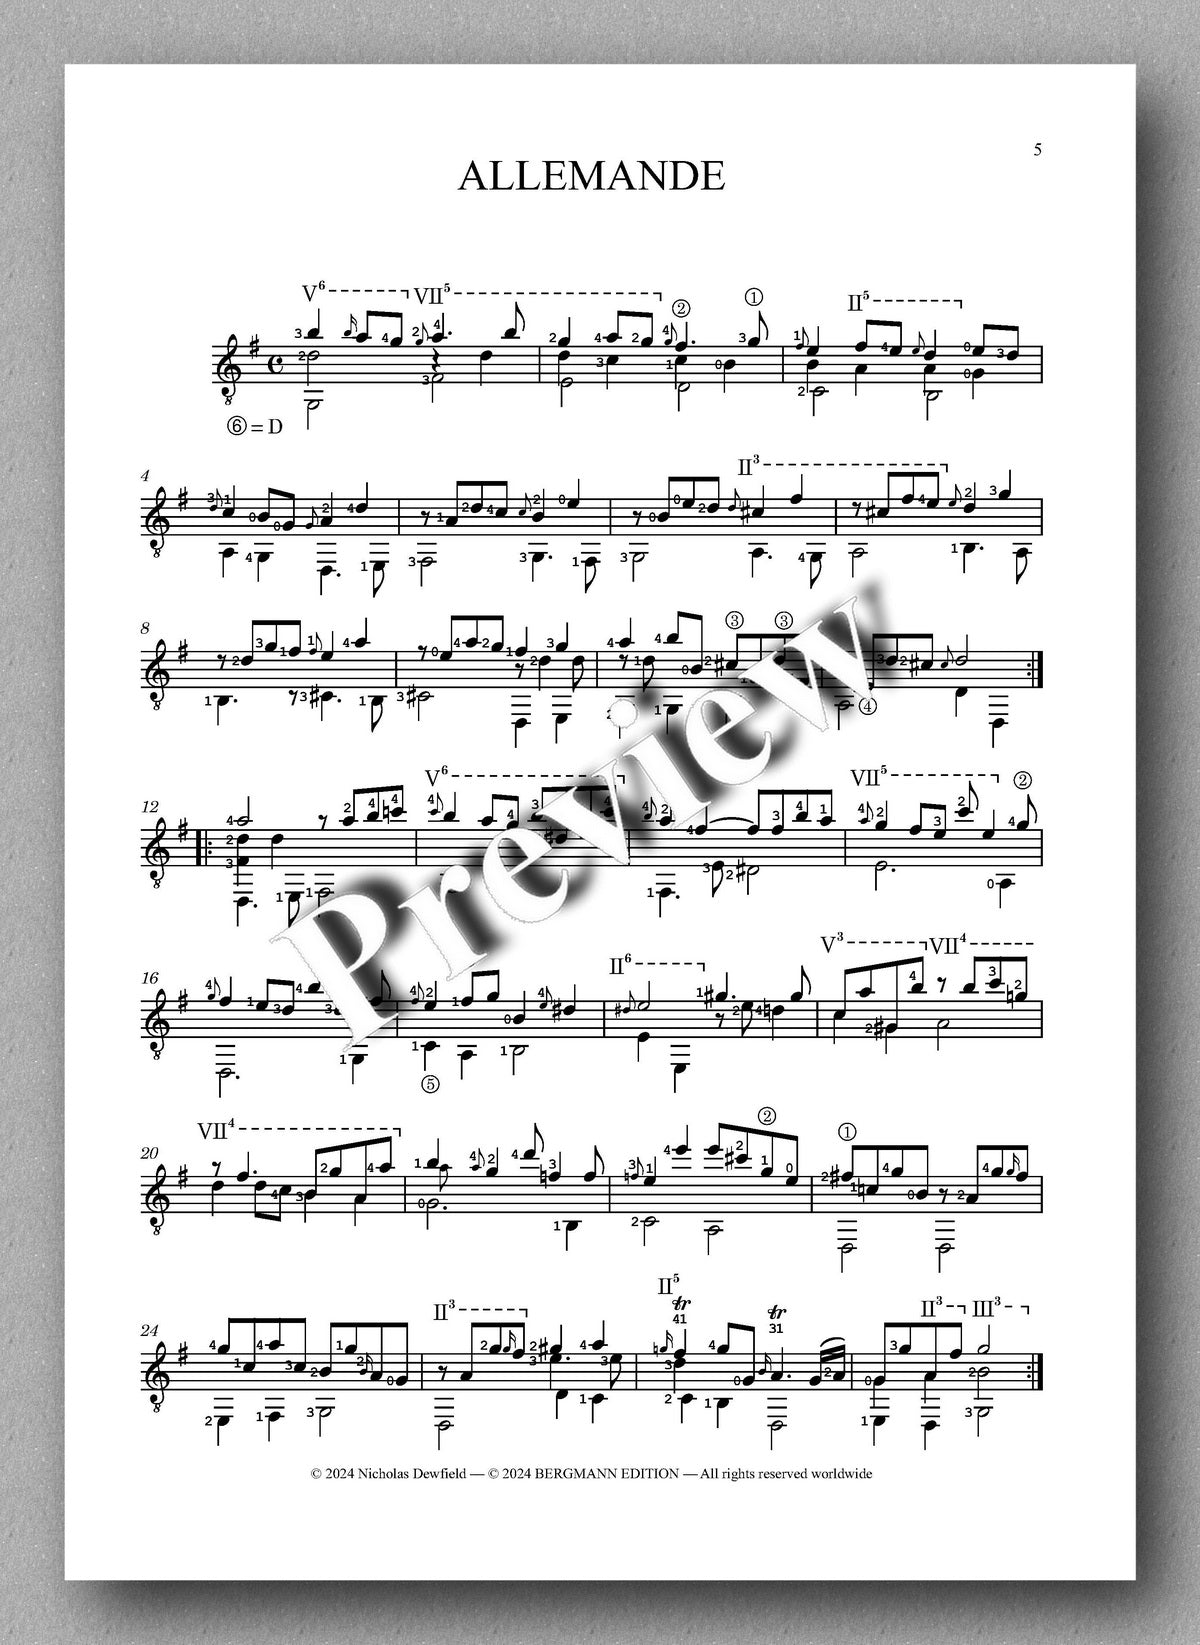 Sylvius Leopold Weiss (1687-1750), Sonata No. 31 - preview of the music score 1